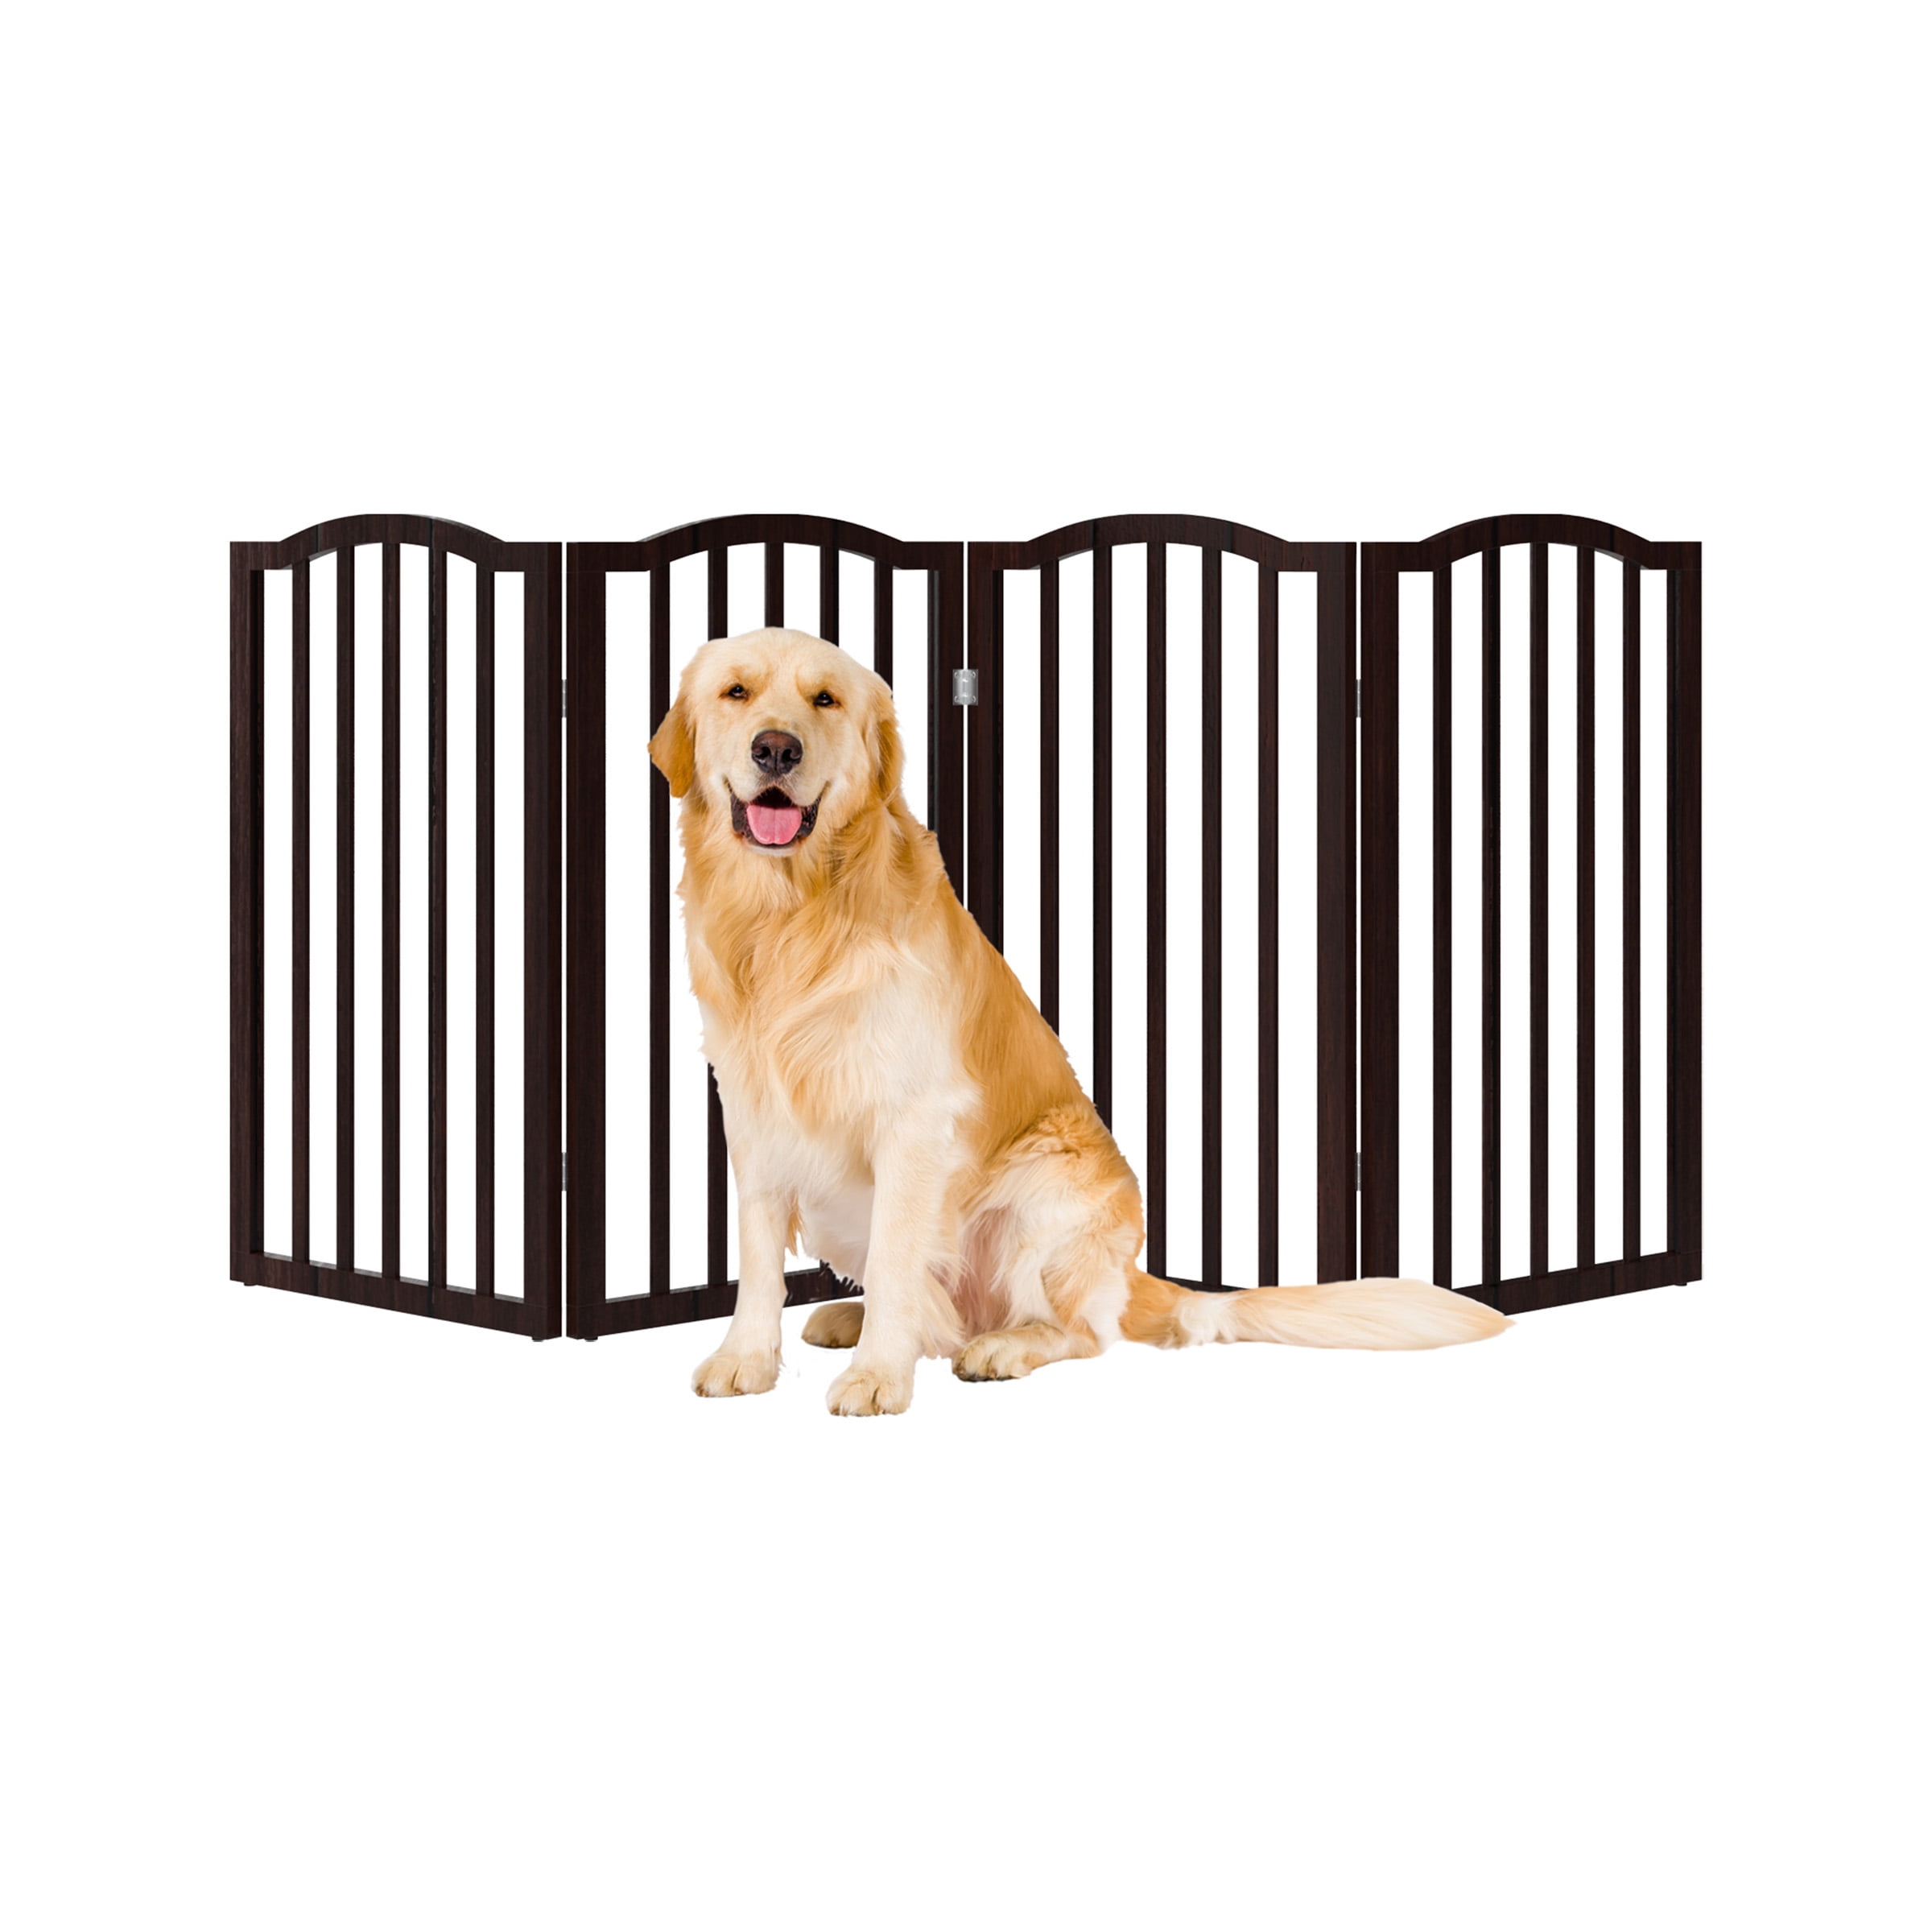 Folding PETMAKER Pet Gate Dog Gate for Doorways Accordion Style Wooden Indoor Dog Fence Stairs or House Freestanding 24-Inch, Brown 